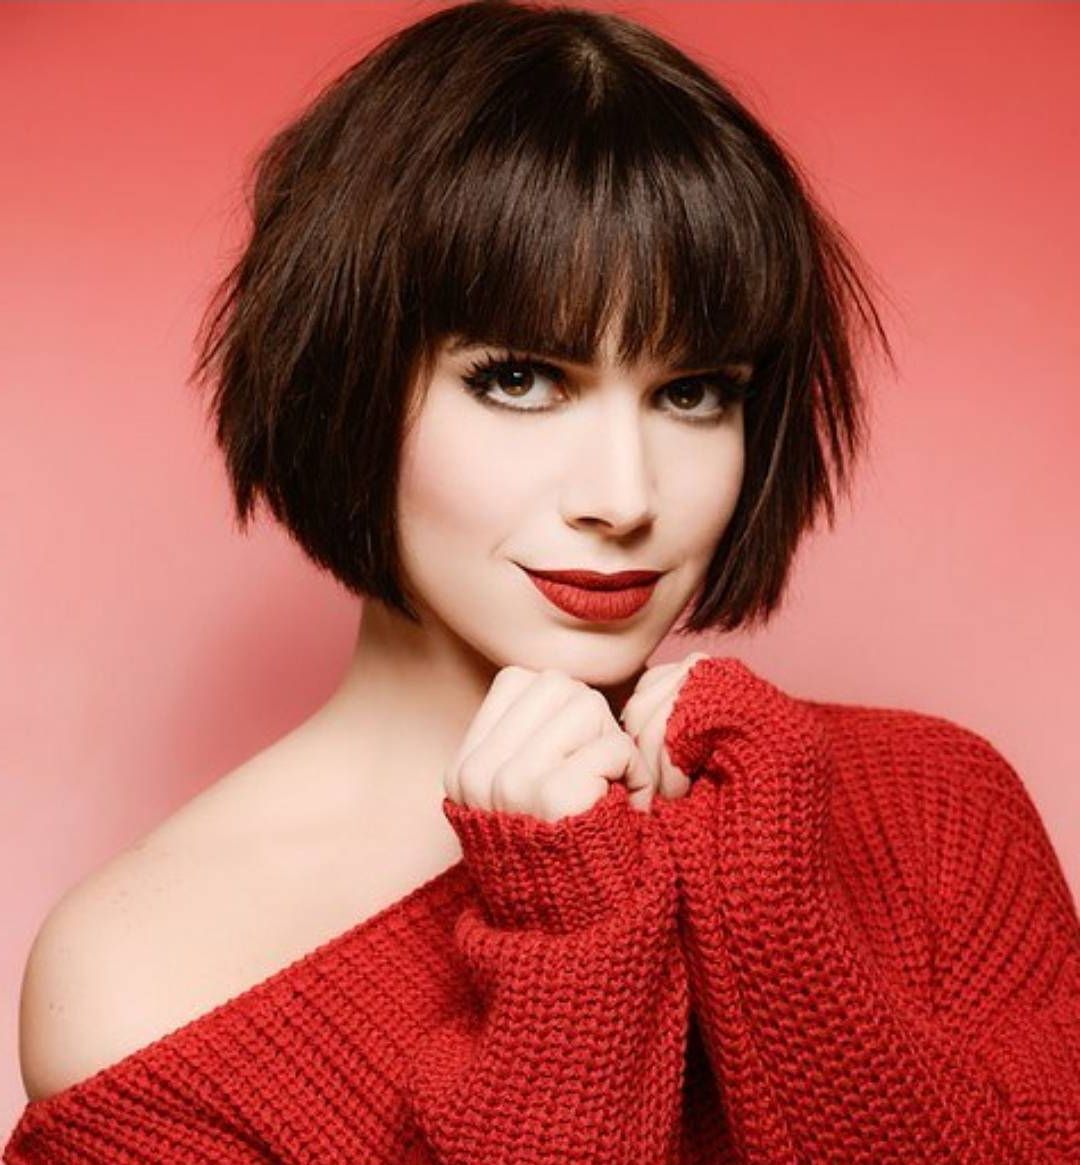 10 Chic Short Bob Haircuts That Balance Your Face Shape! – Short Pertaining To Chic Short Haircuts (View 12 of 25)